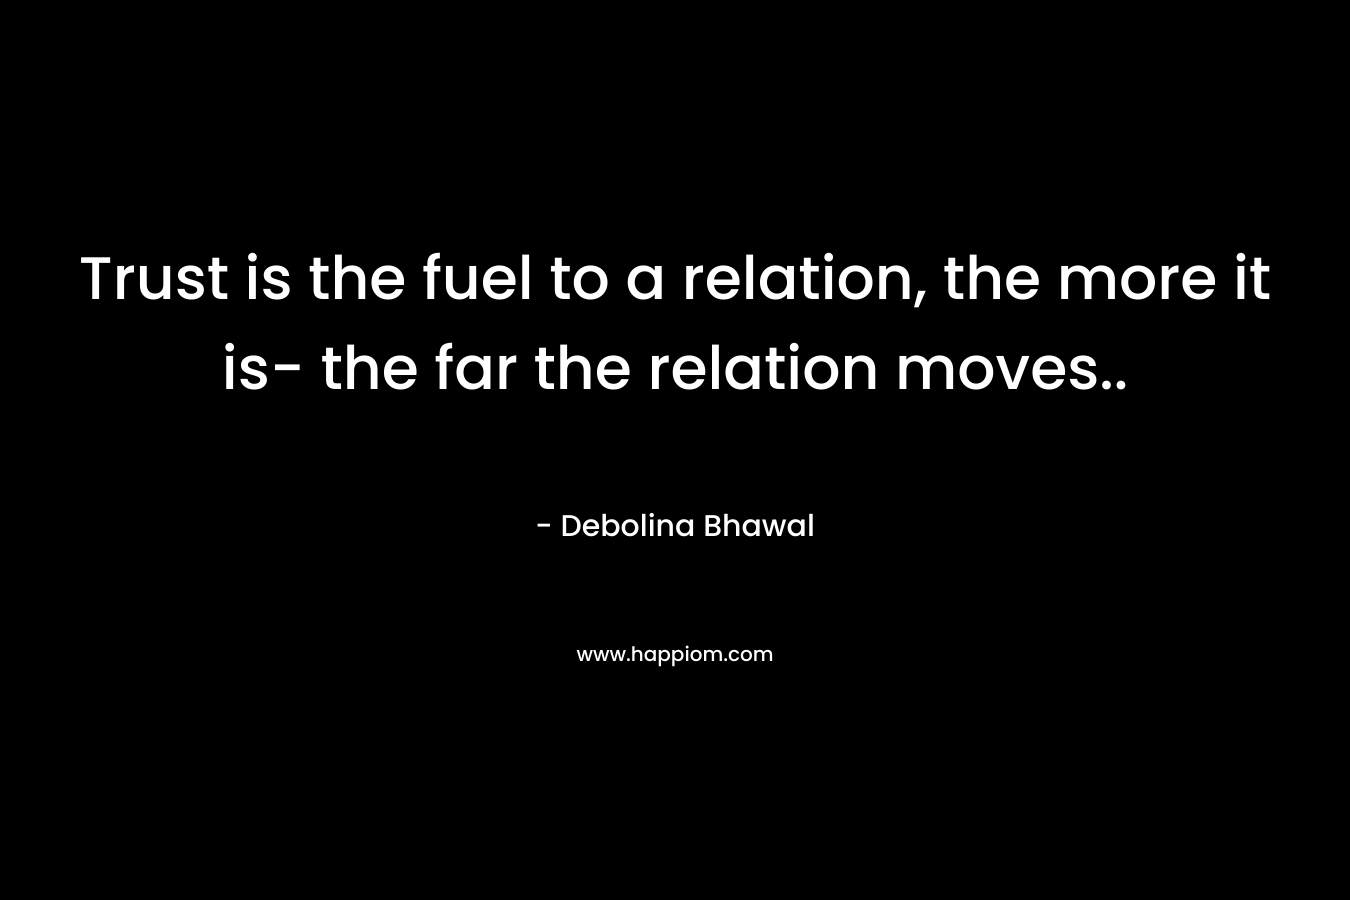 Trust is the fuel to a relation, the more it is- the far the relation moves..